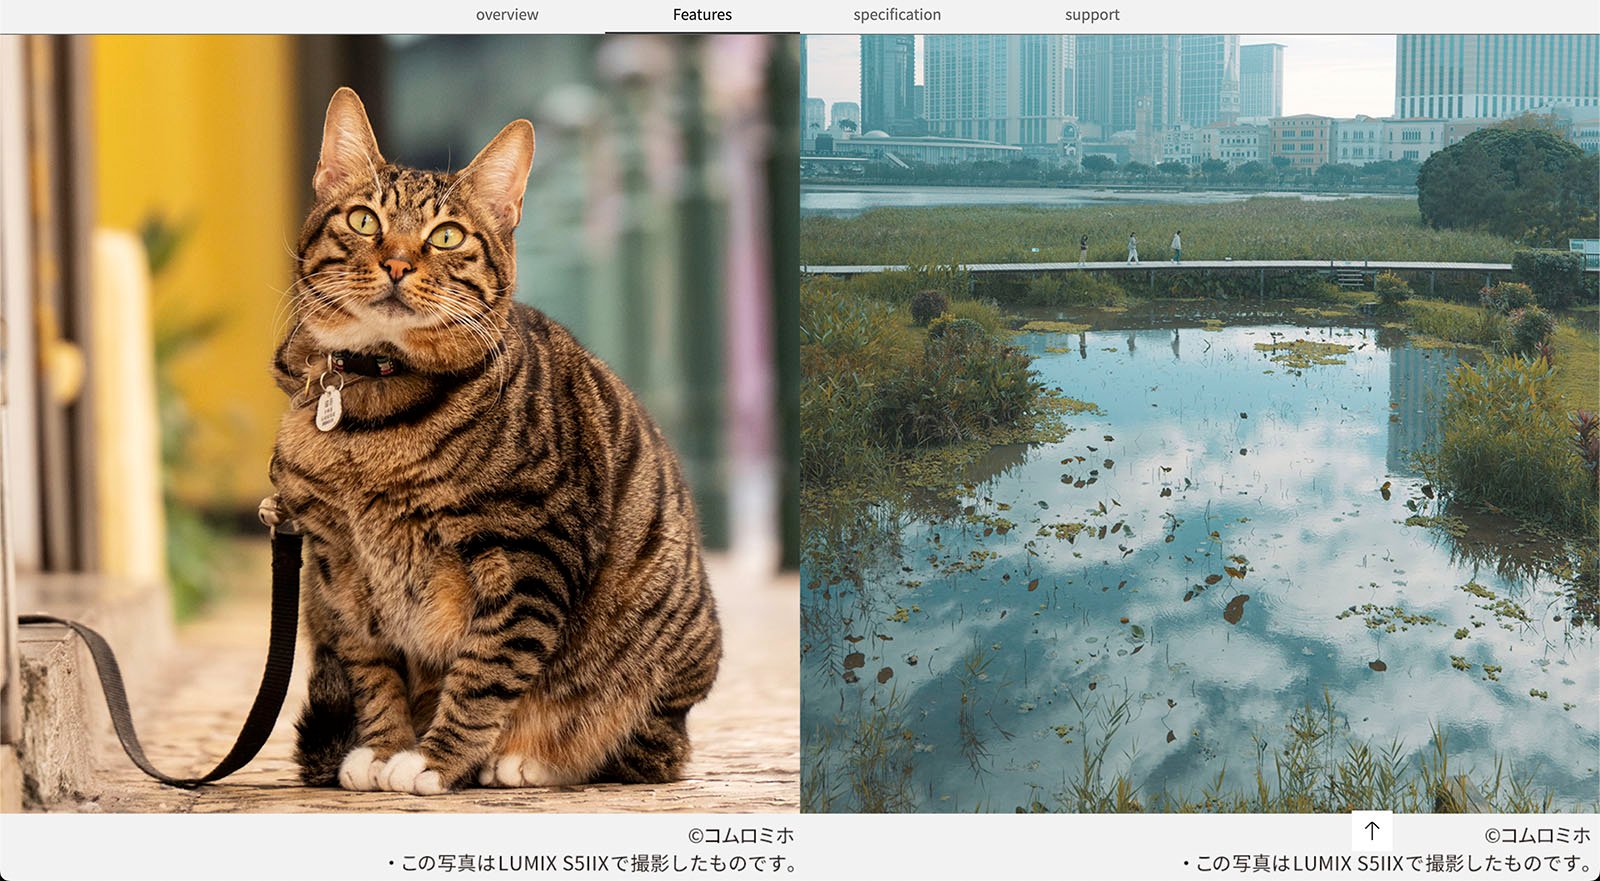 A split image shows a tabby cat sitting on the left side, looking at the camera with a leash around its neck. On the right, a serene wetland scene with tall grasses, still water, and city buildings in the background. Japanese text is present at the bottom.